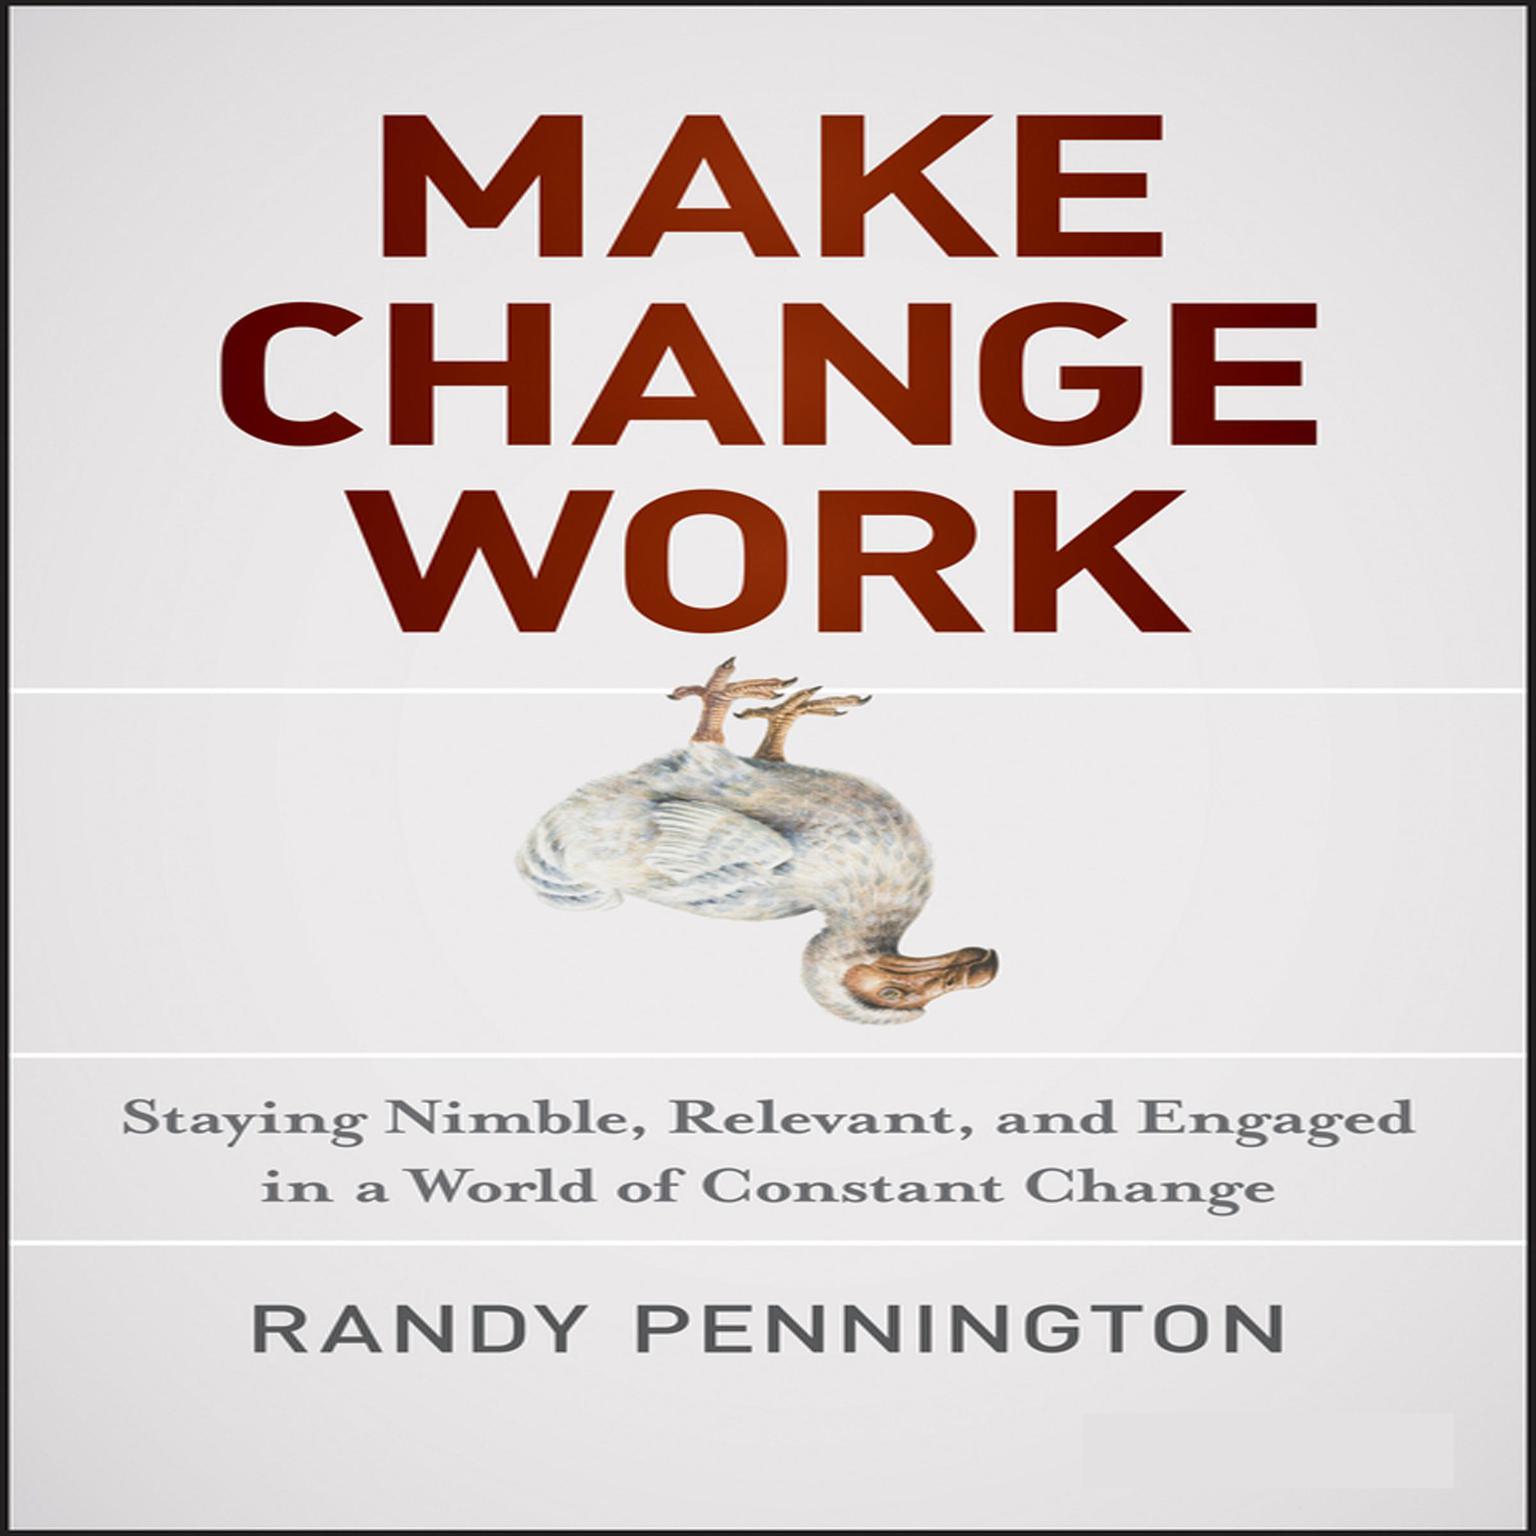 Make Change Work: Staying Nimble, Relevant, and Engaged in a World of Constant Change Audiobook, by Randy Pennington